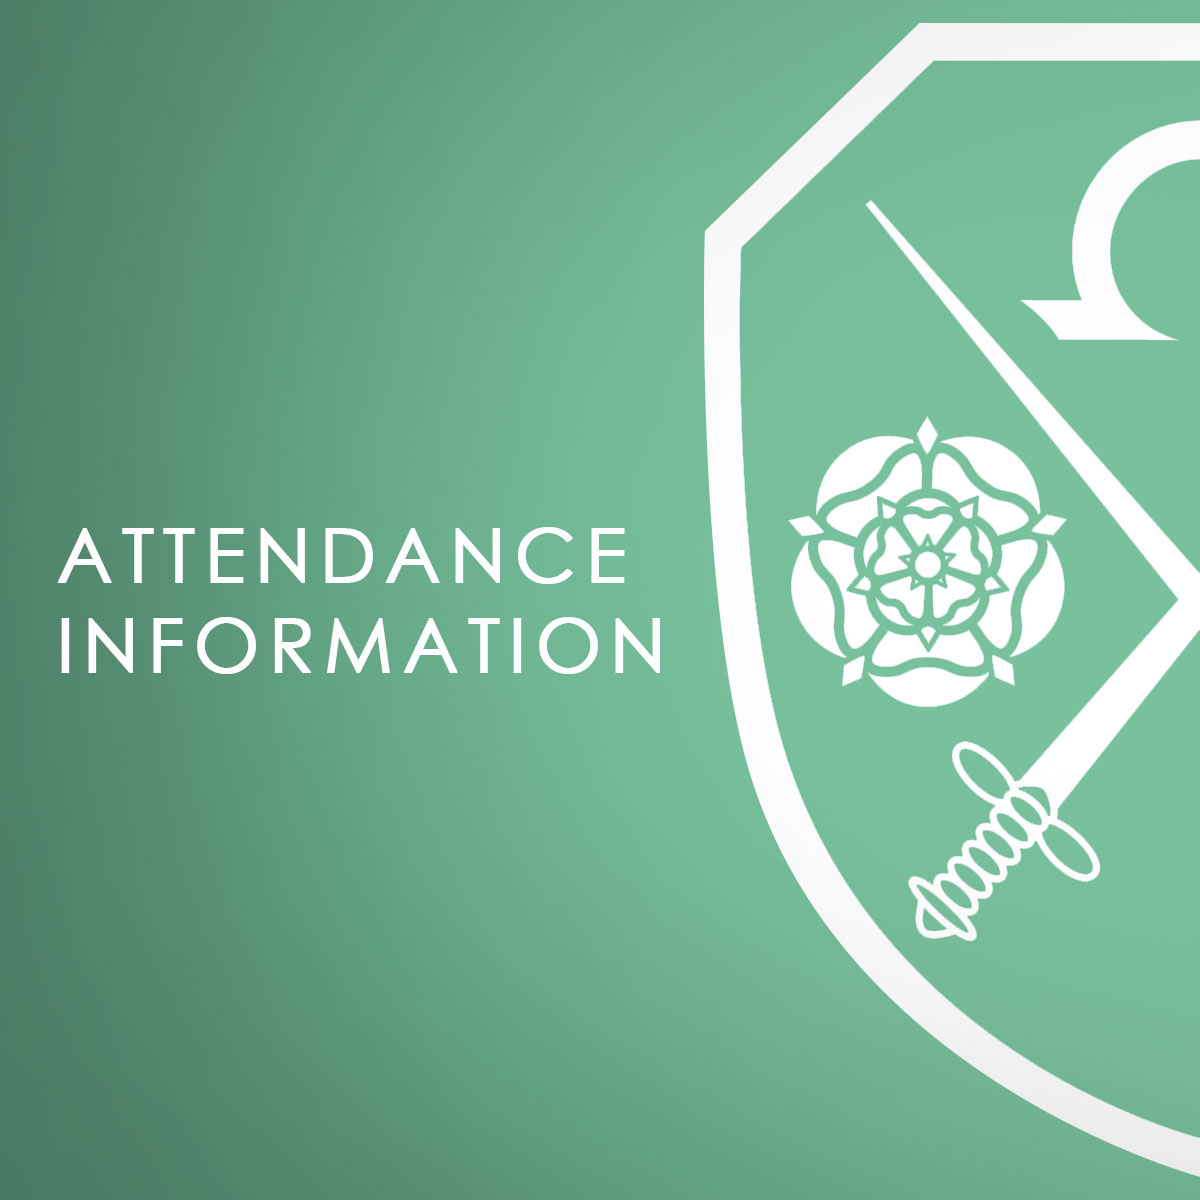 A green background with the East Barnet School logo which says Attendance Information